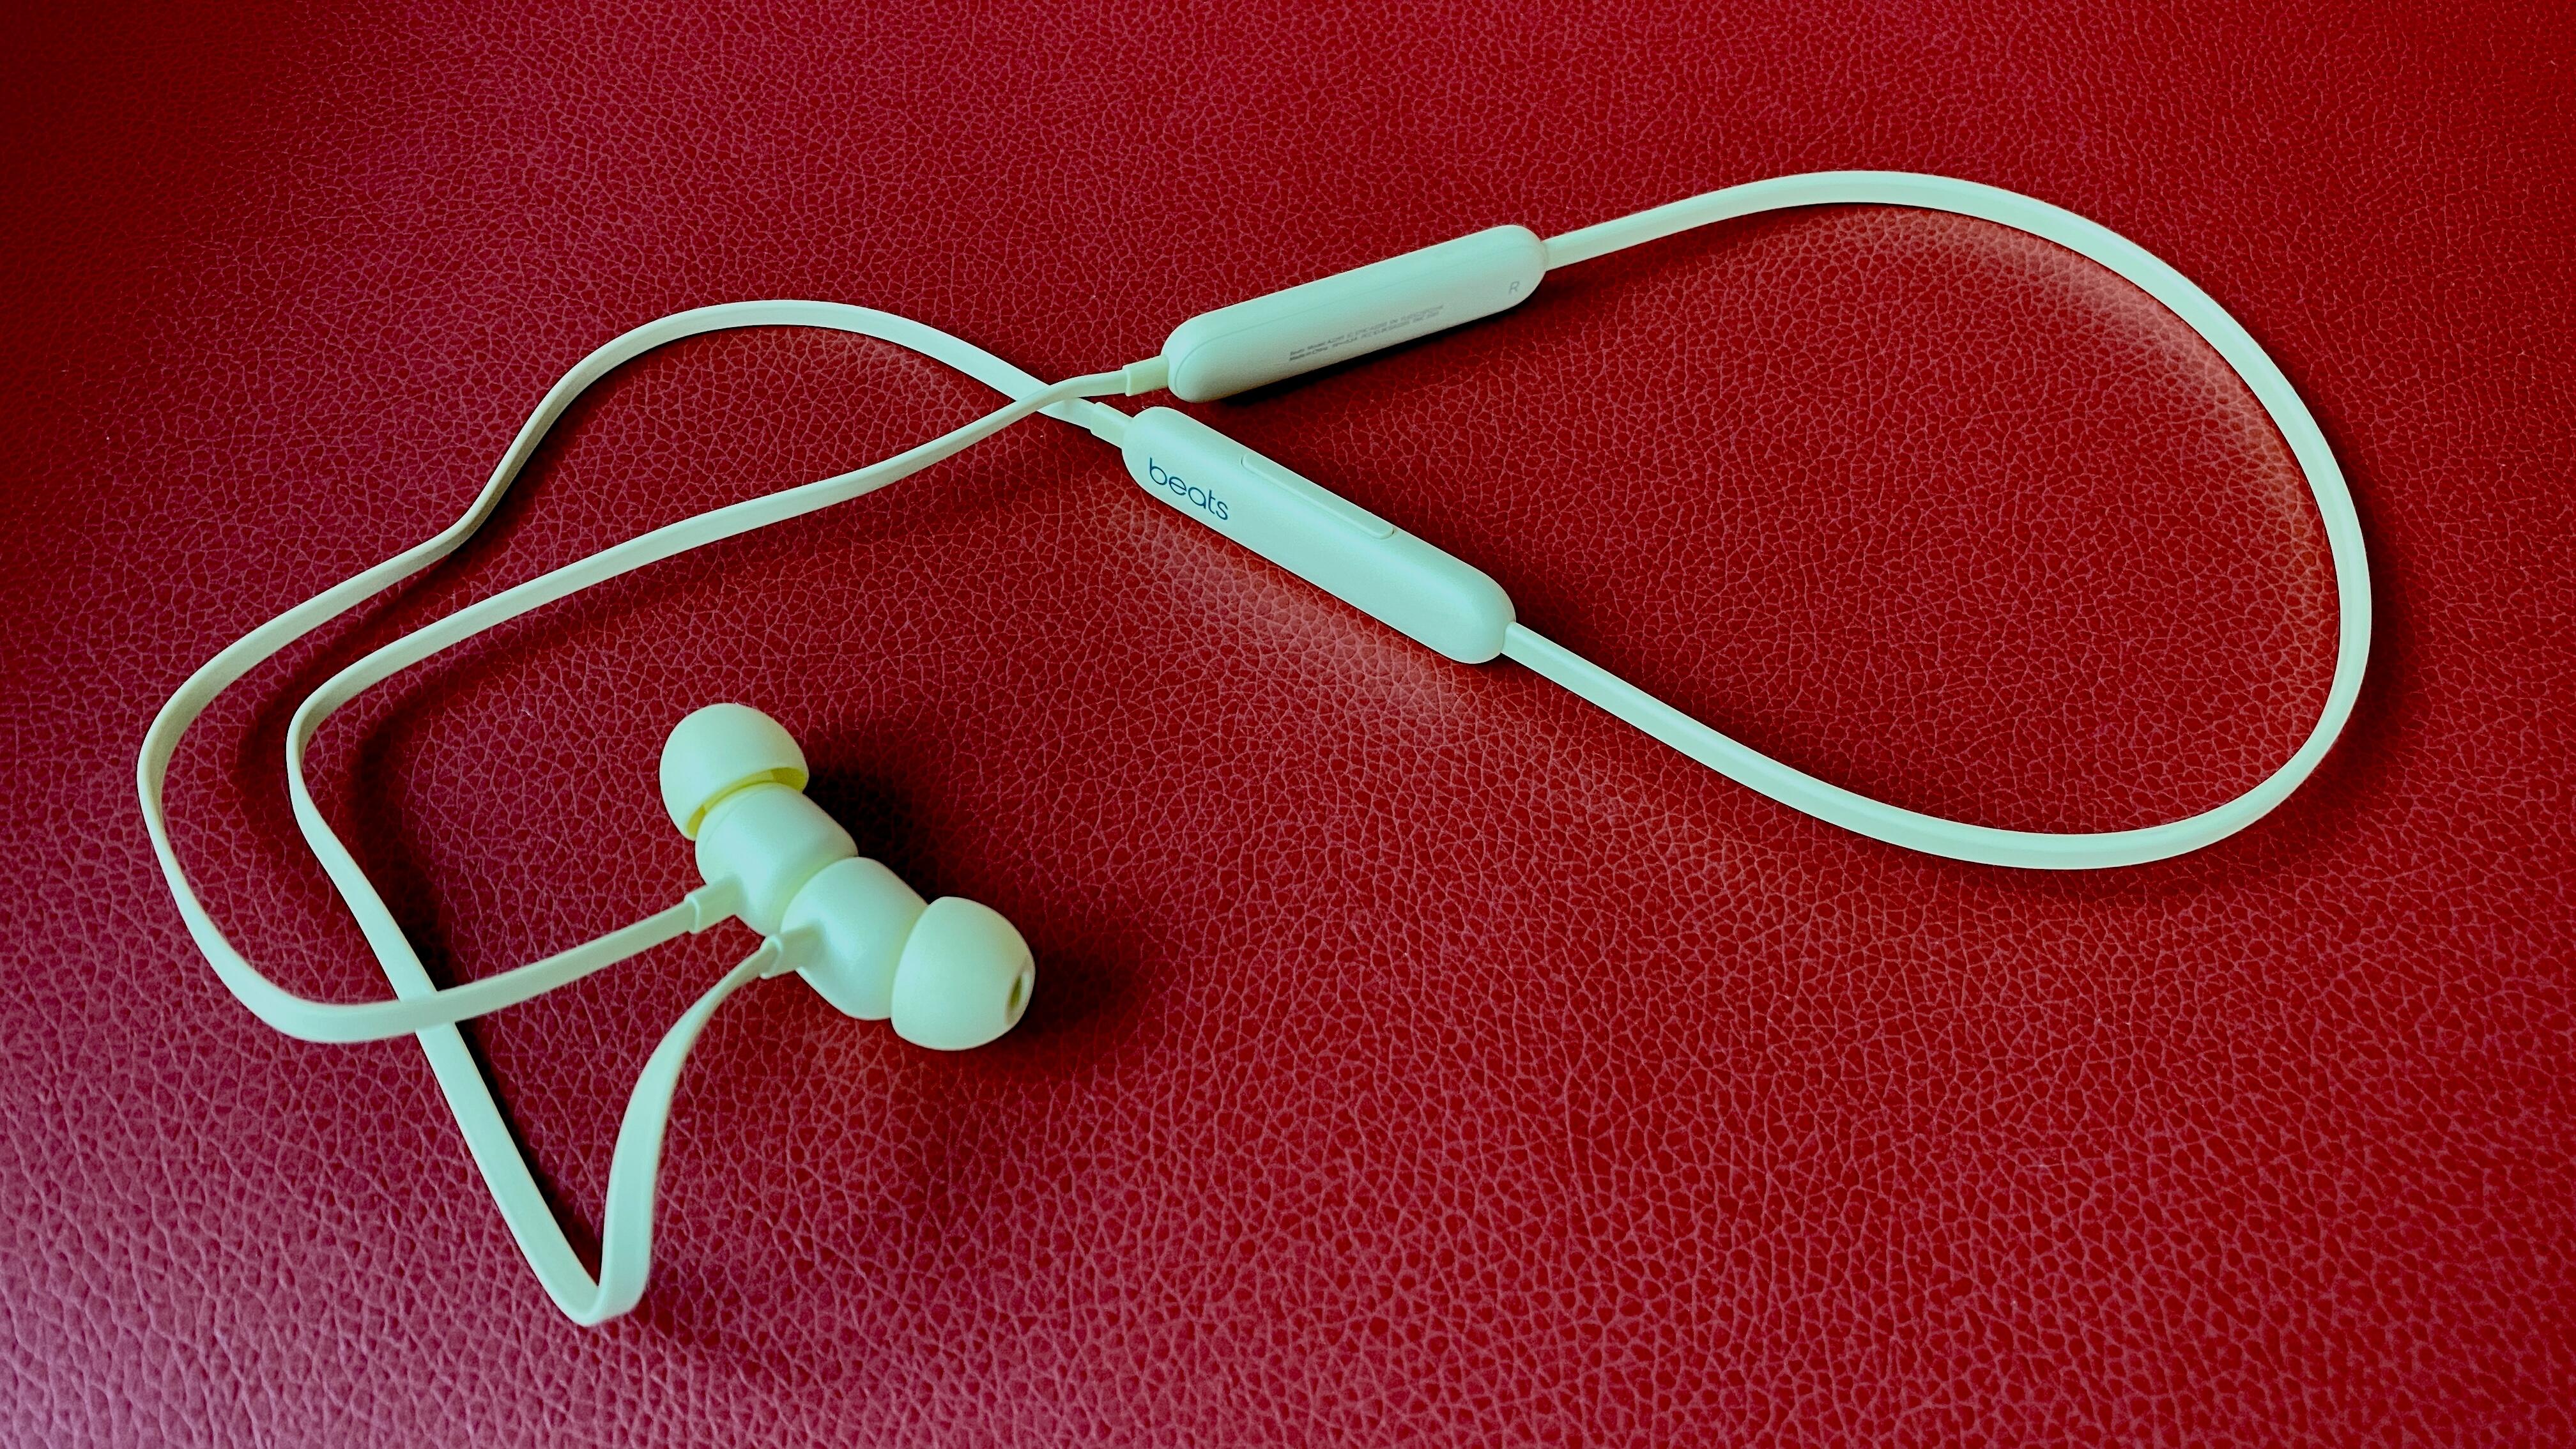 beats no wire earbuds